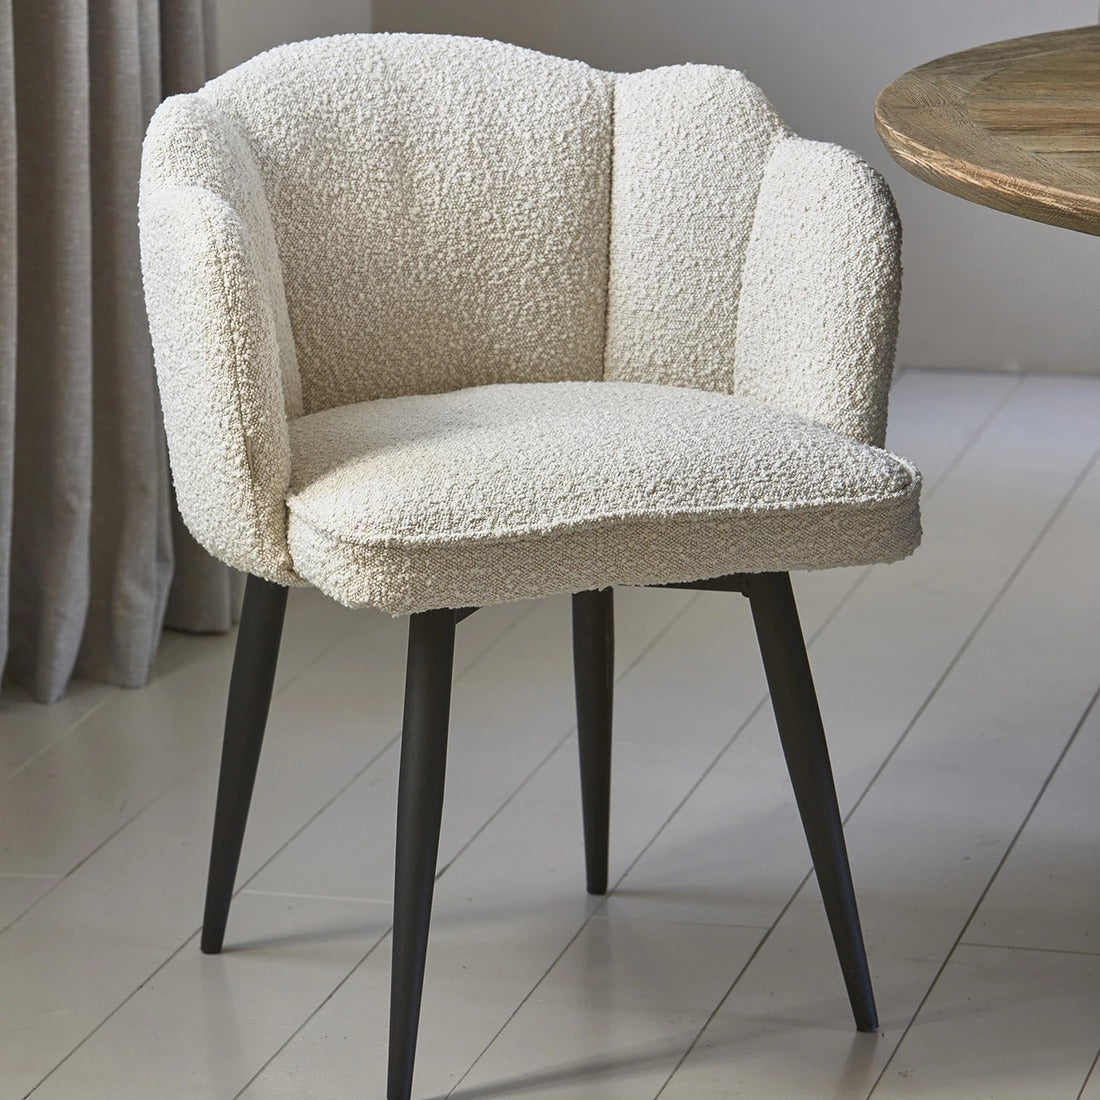 Dining table chair DAUPHINE - White Sand